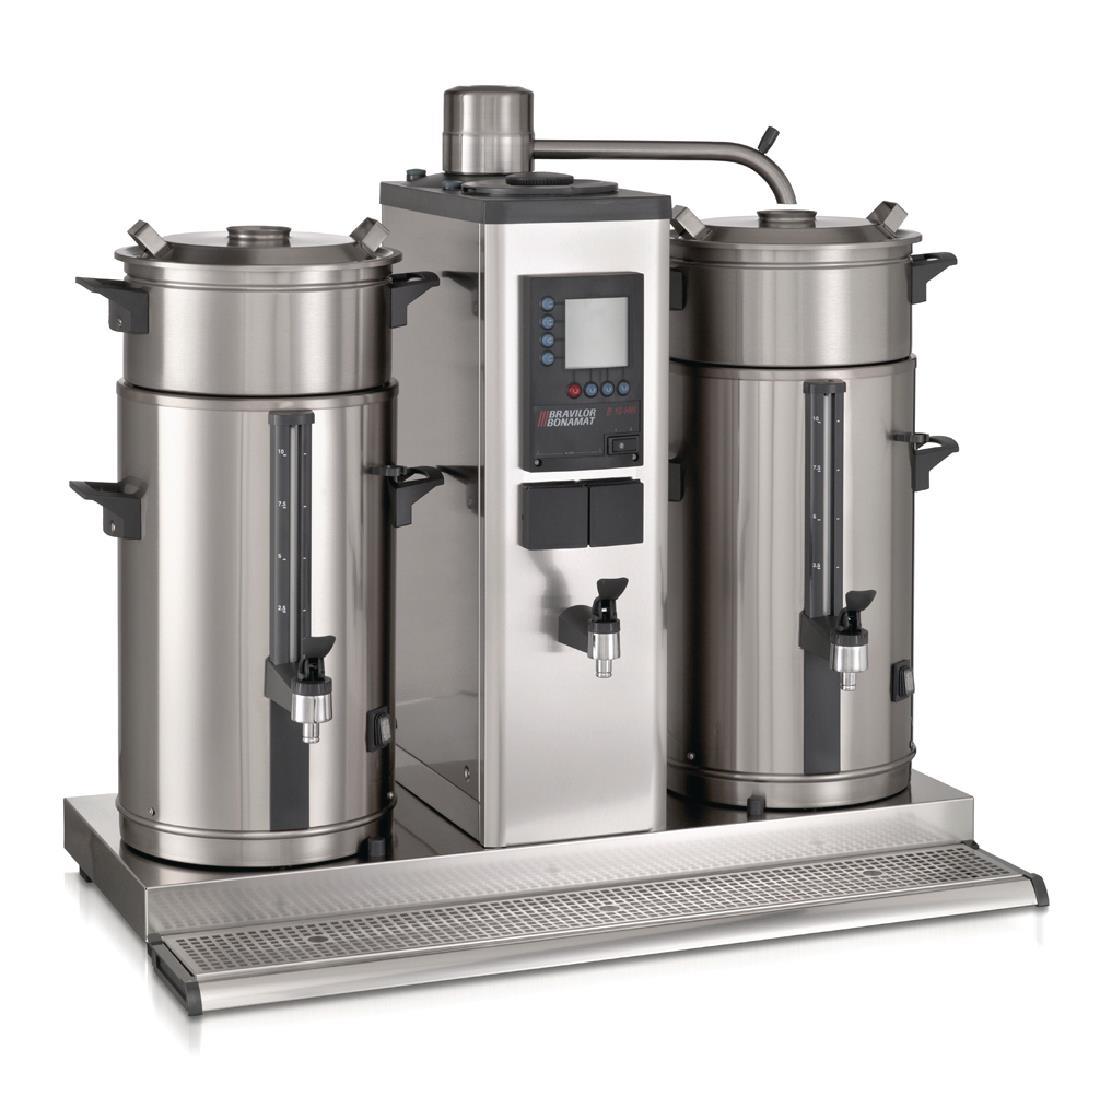 Bravilor B10 HW Bulk Coffee Brewer with 2x10Ltr Coffee Urns and Hot Water Tap 3 Phase - DC690-3P  - 3